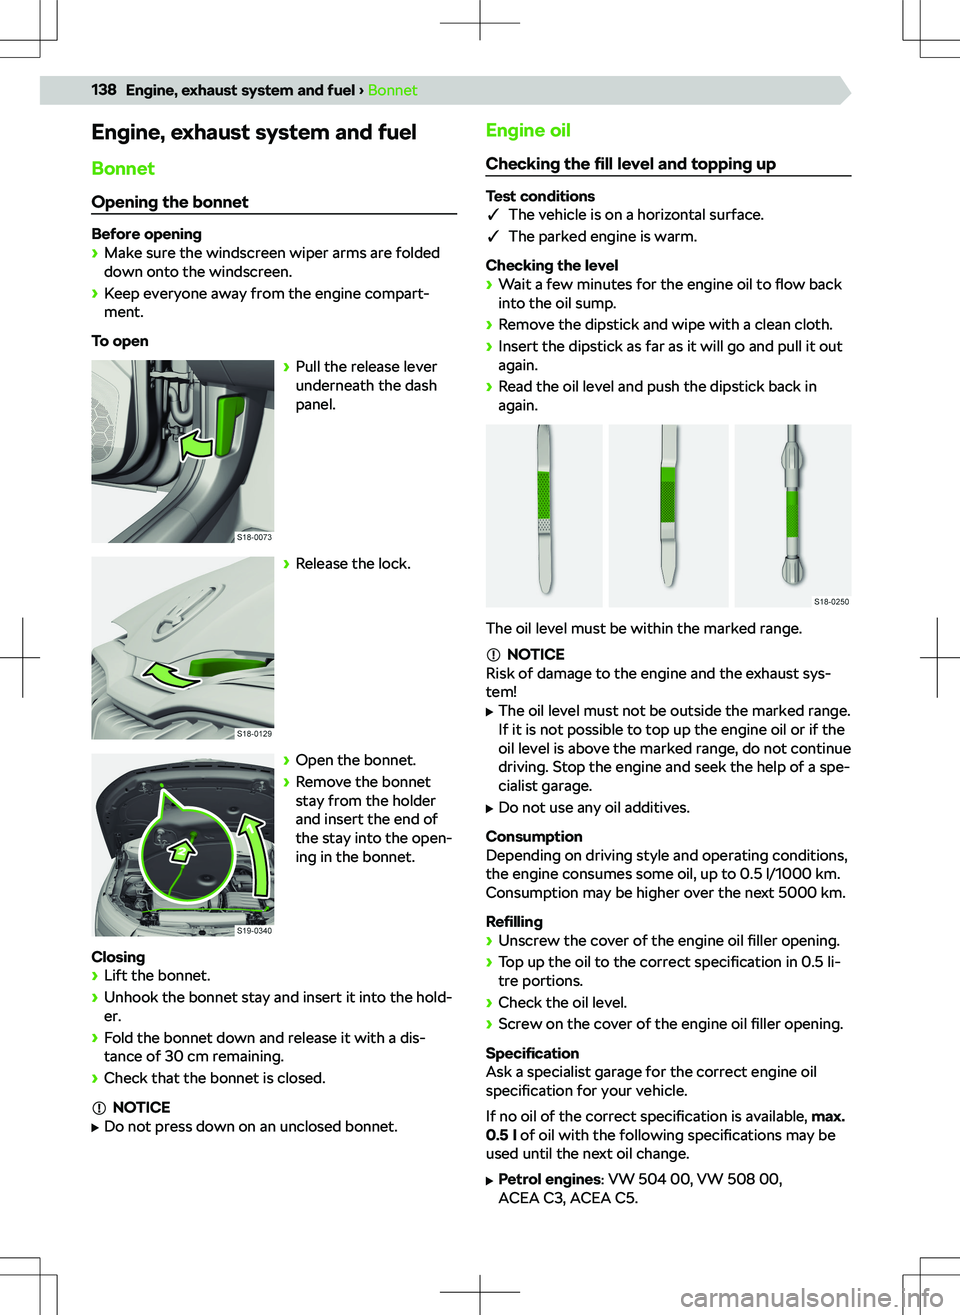 SKODA KAMIQ 2020  Owner´s Manual Engine, exhaust system and fuelBonnet
Opening the bonnet
Before opening 